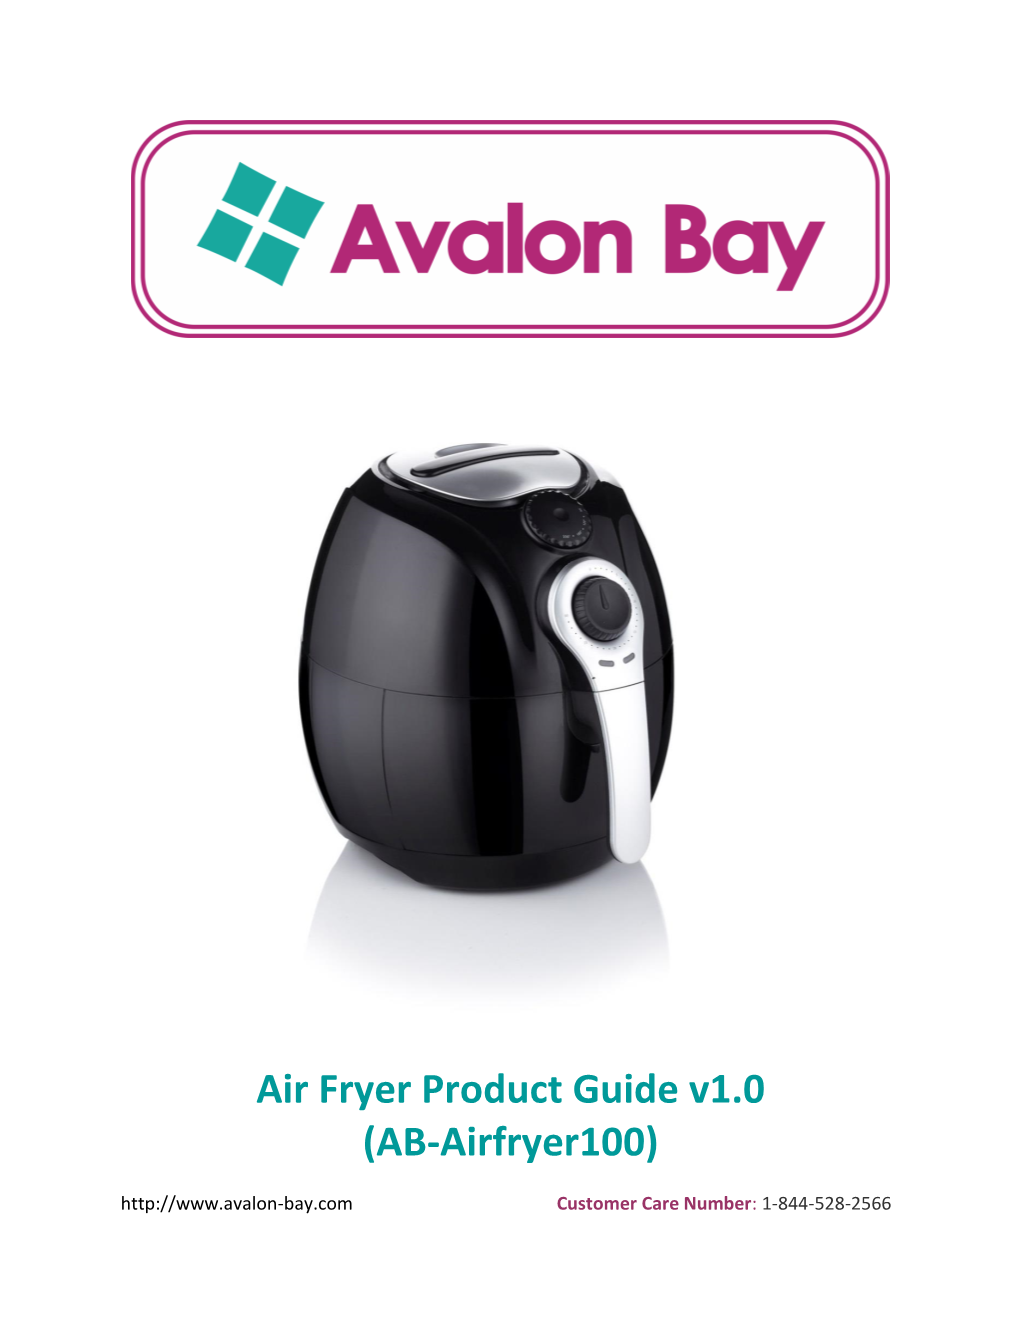 Avalon Bay Air Fryer Product Guide